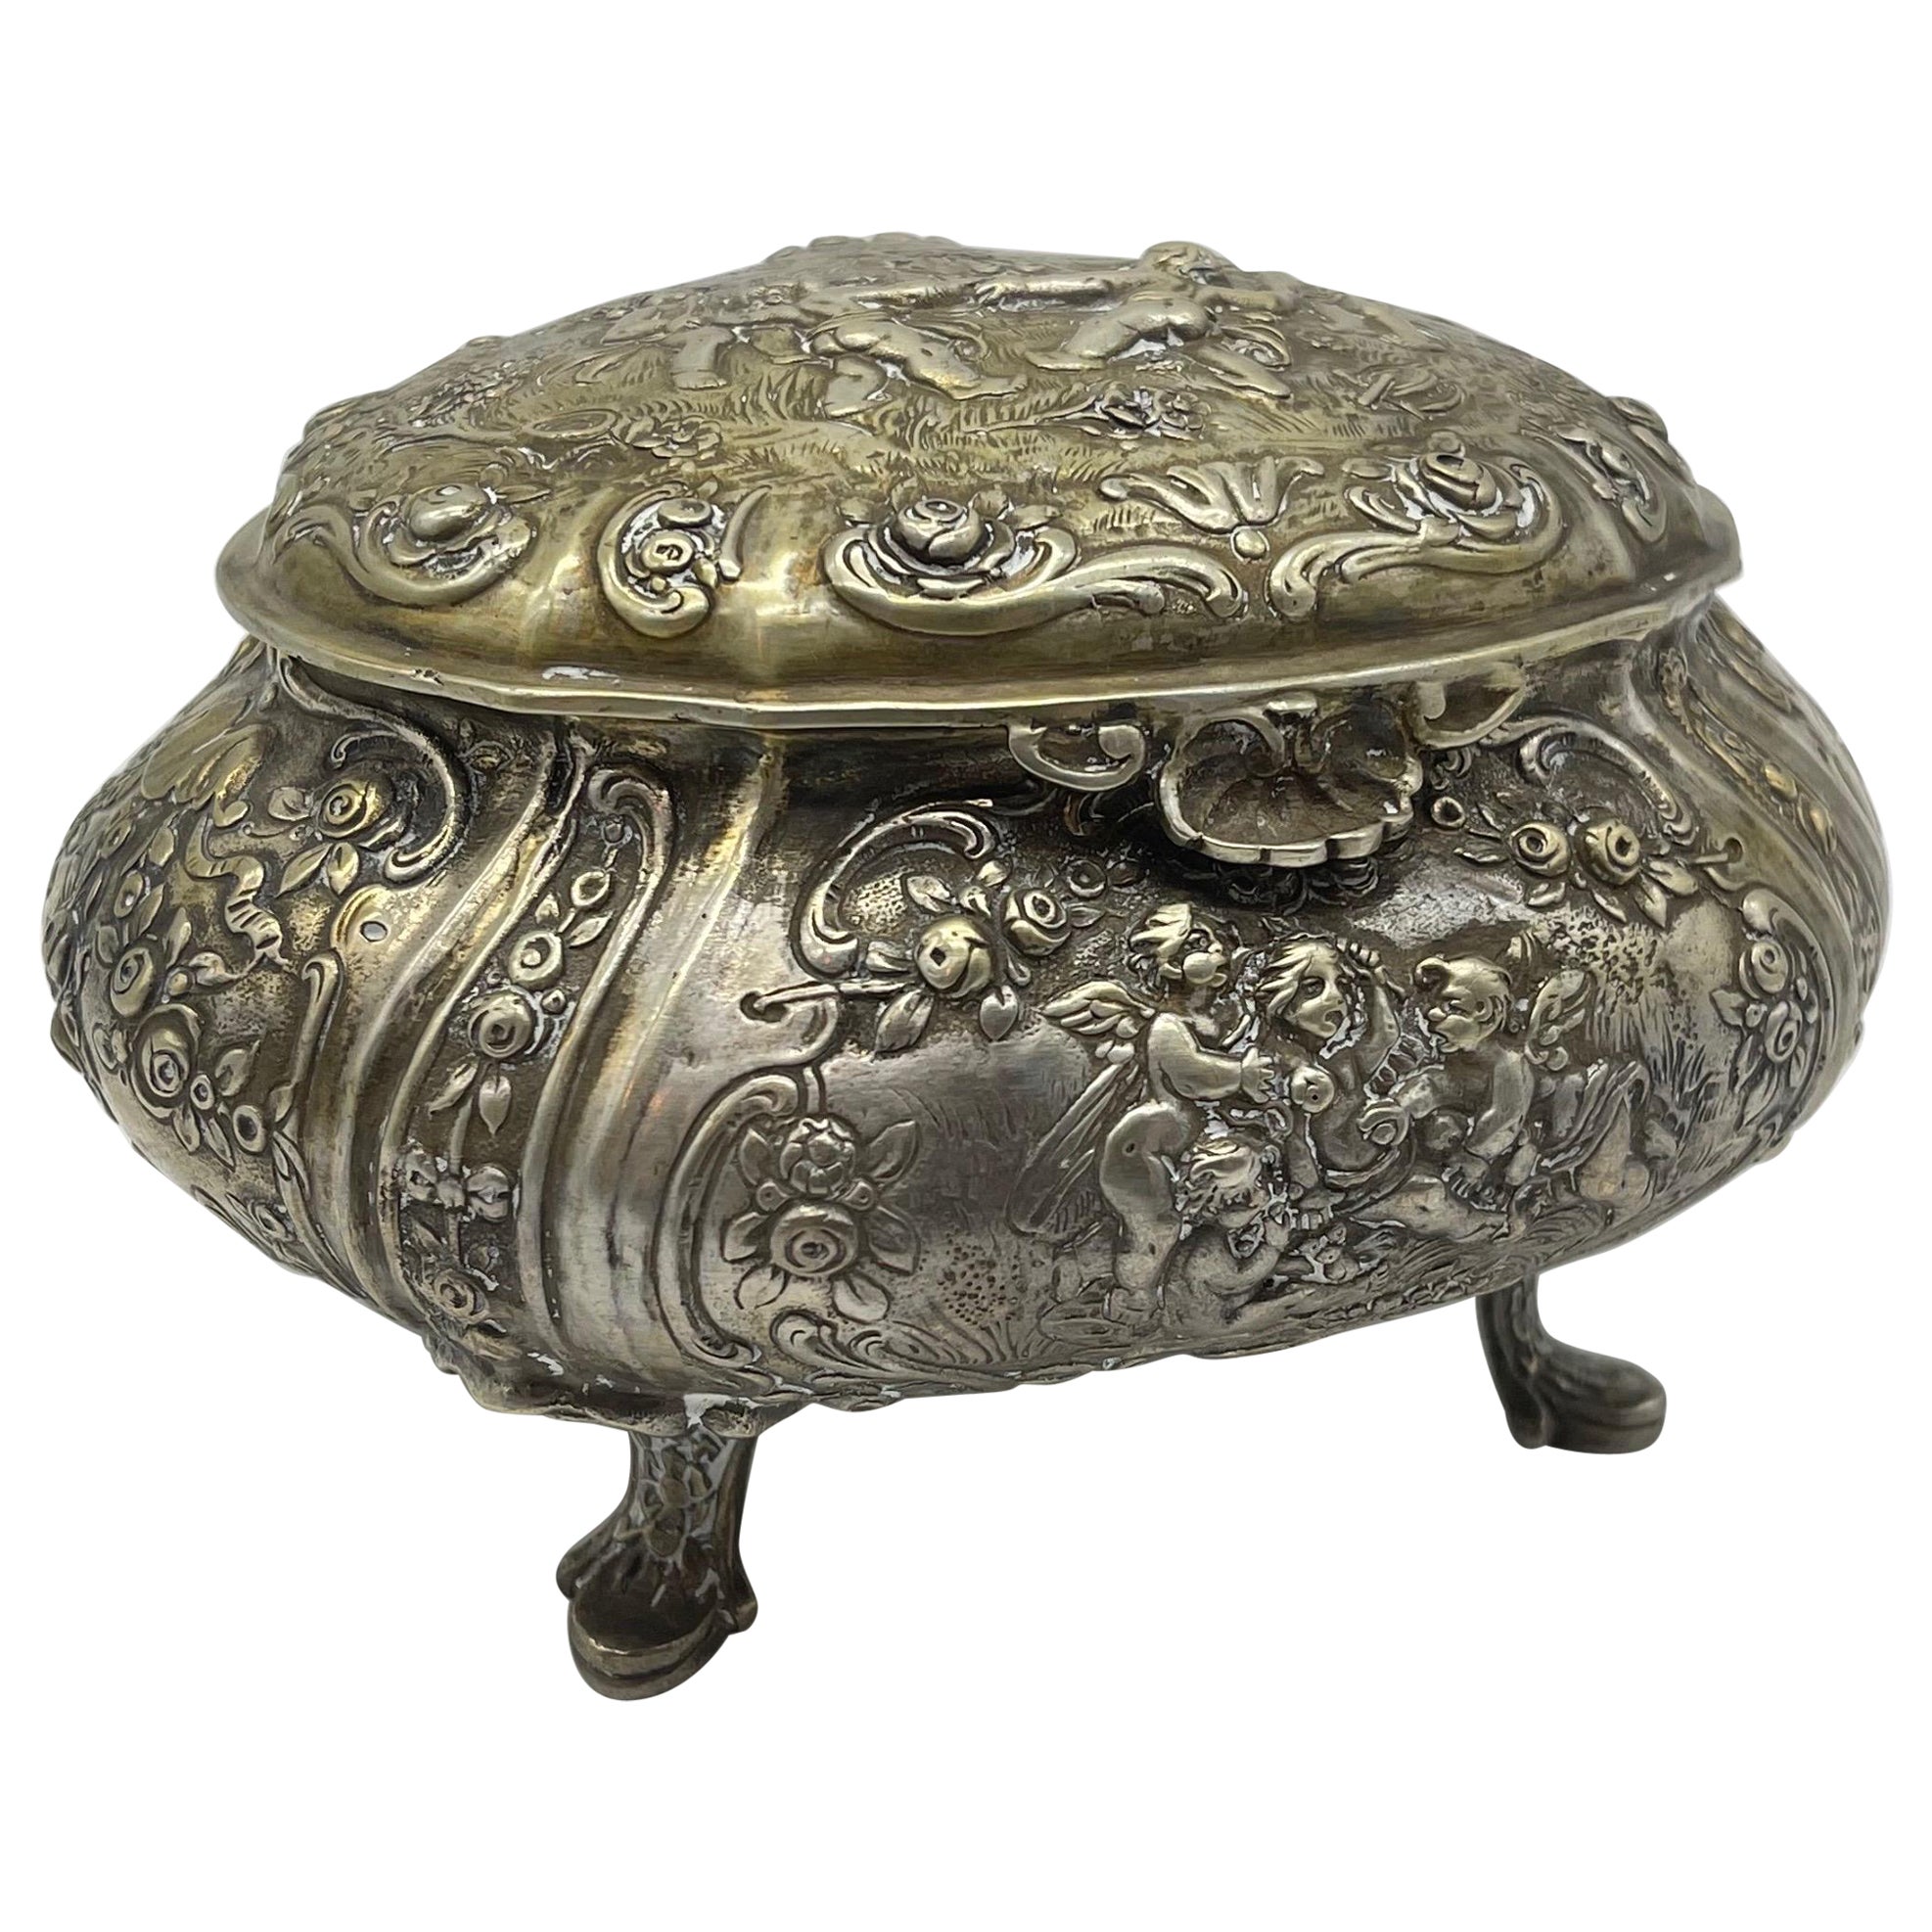 Exclusive Bonboniere / Sugar Lidded box 800 Silver Germany gilded, Flowers Putto